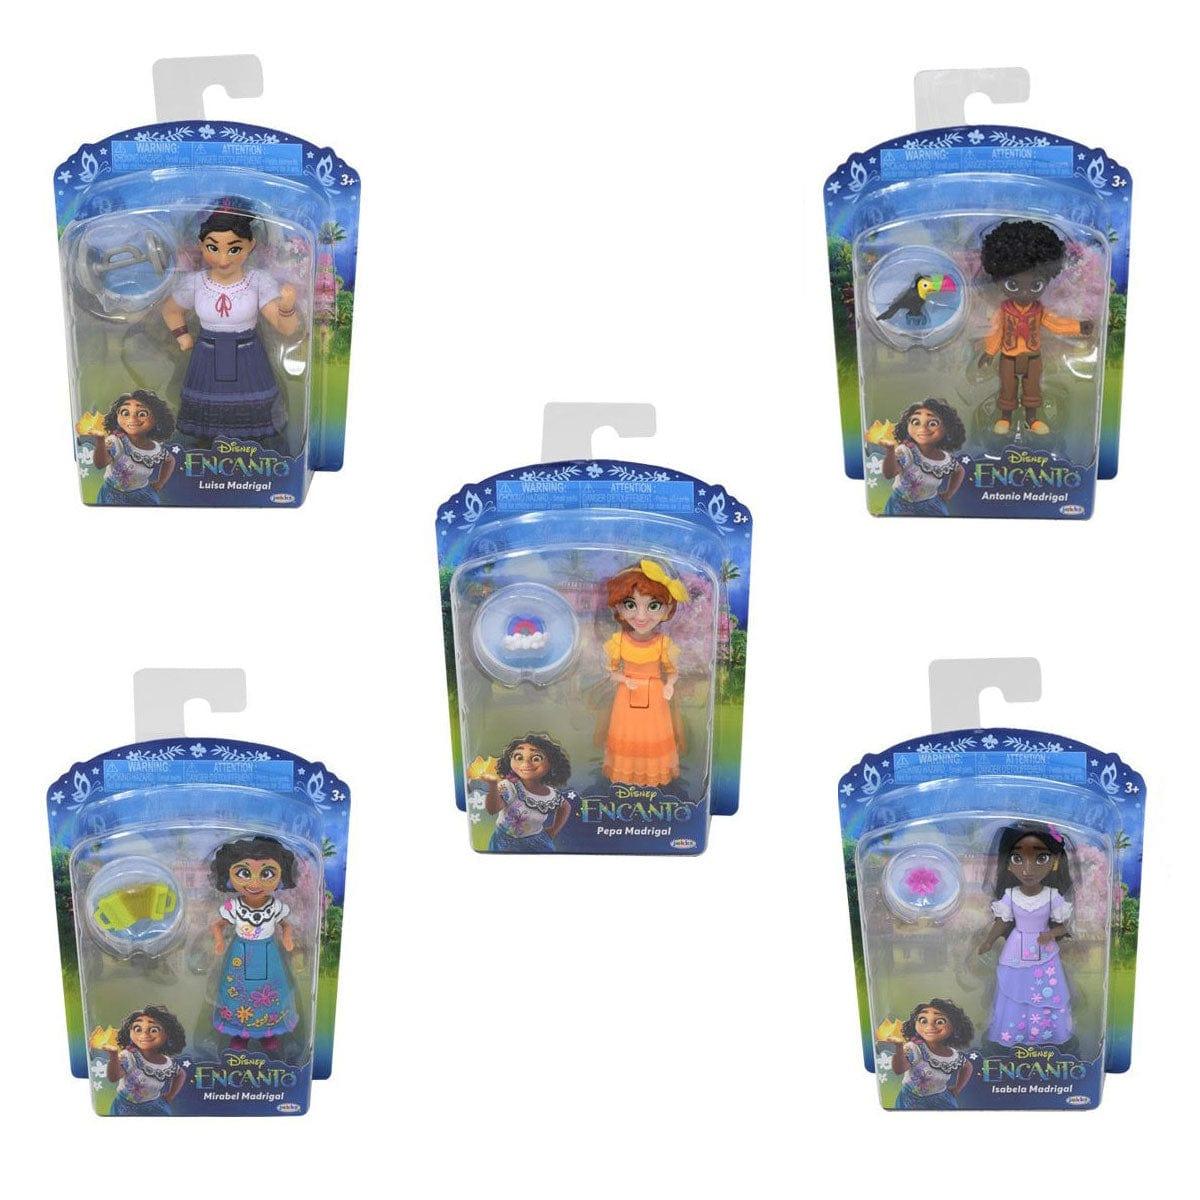 U.P.D. INC Toys & Games Disney Encanto Assorted Small Doll and Accessory, 1 Count